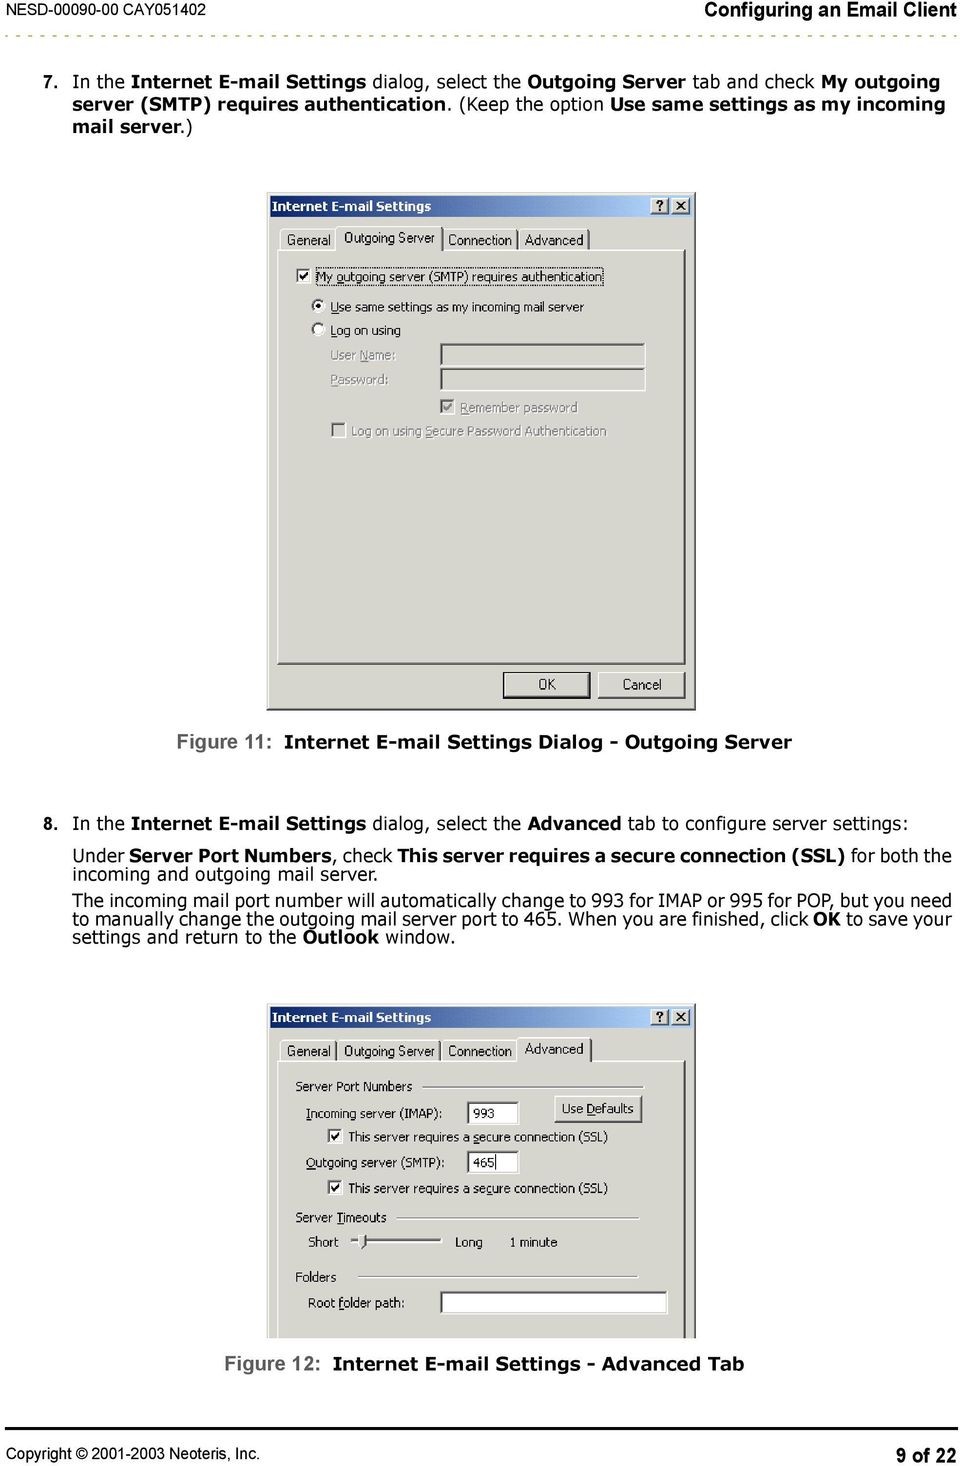 In the Internet E-mail Settings dialog, select the Advanced tab to configure server settings: Under Server Port Numbers, check This server requires a secure connection (SSL) for both the incoming